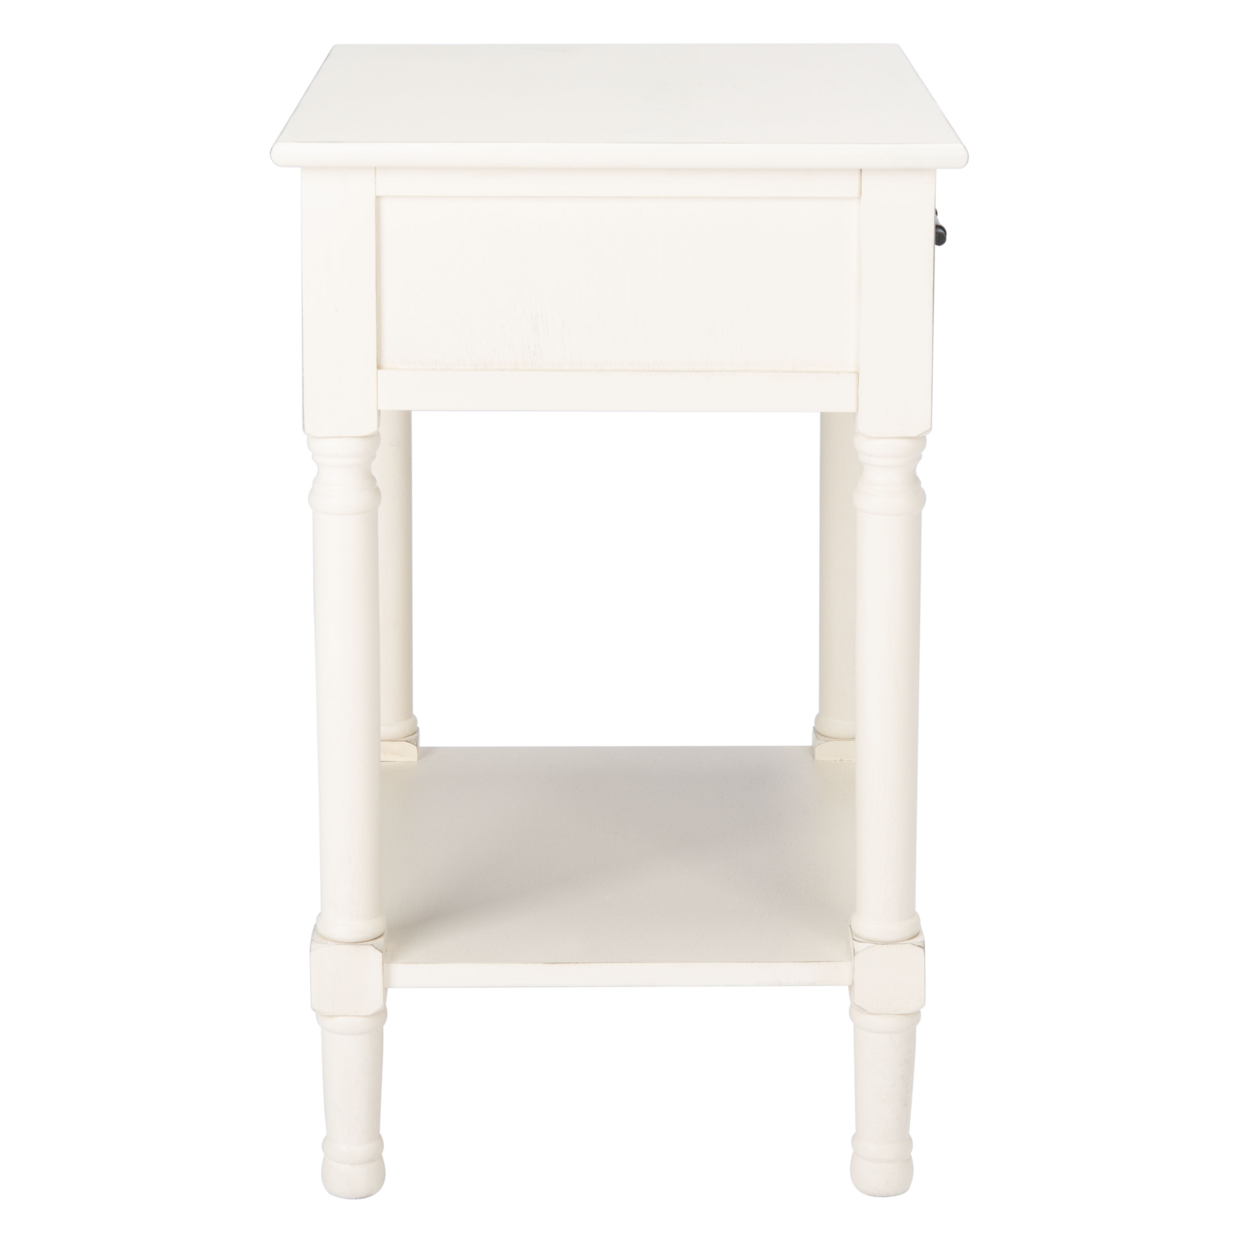 SAFAVIEH Ryder 1-Drawer Accent Table Distressed White / Greige